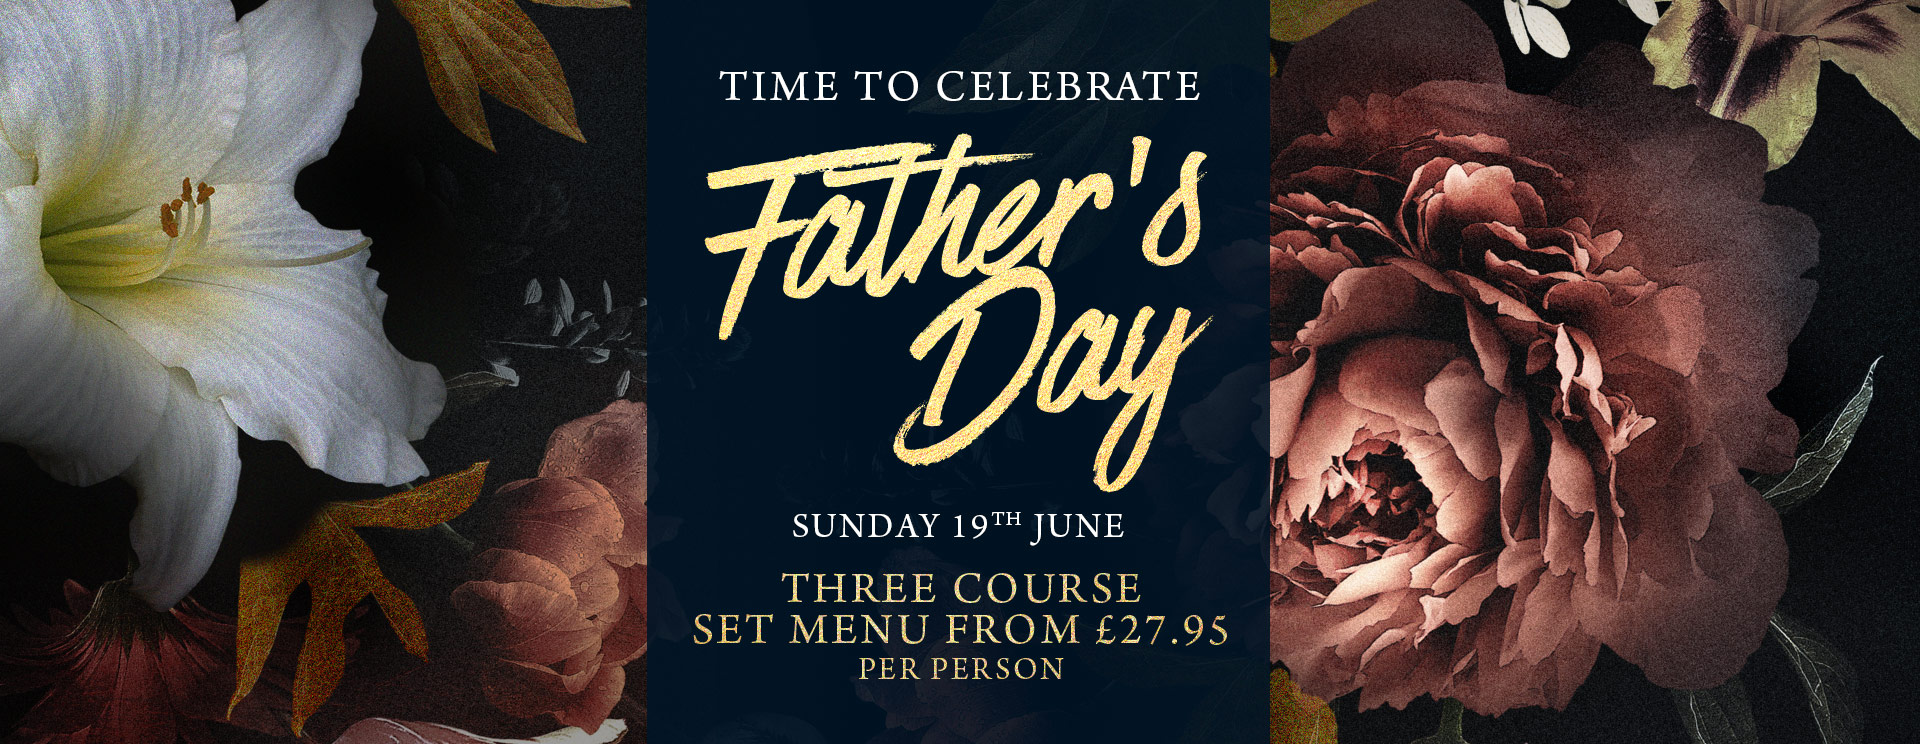 Fathers Day at The Kingfisher